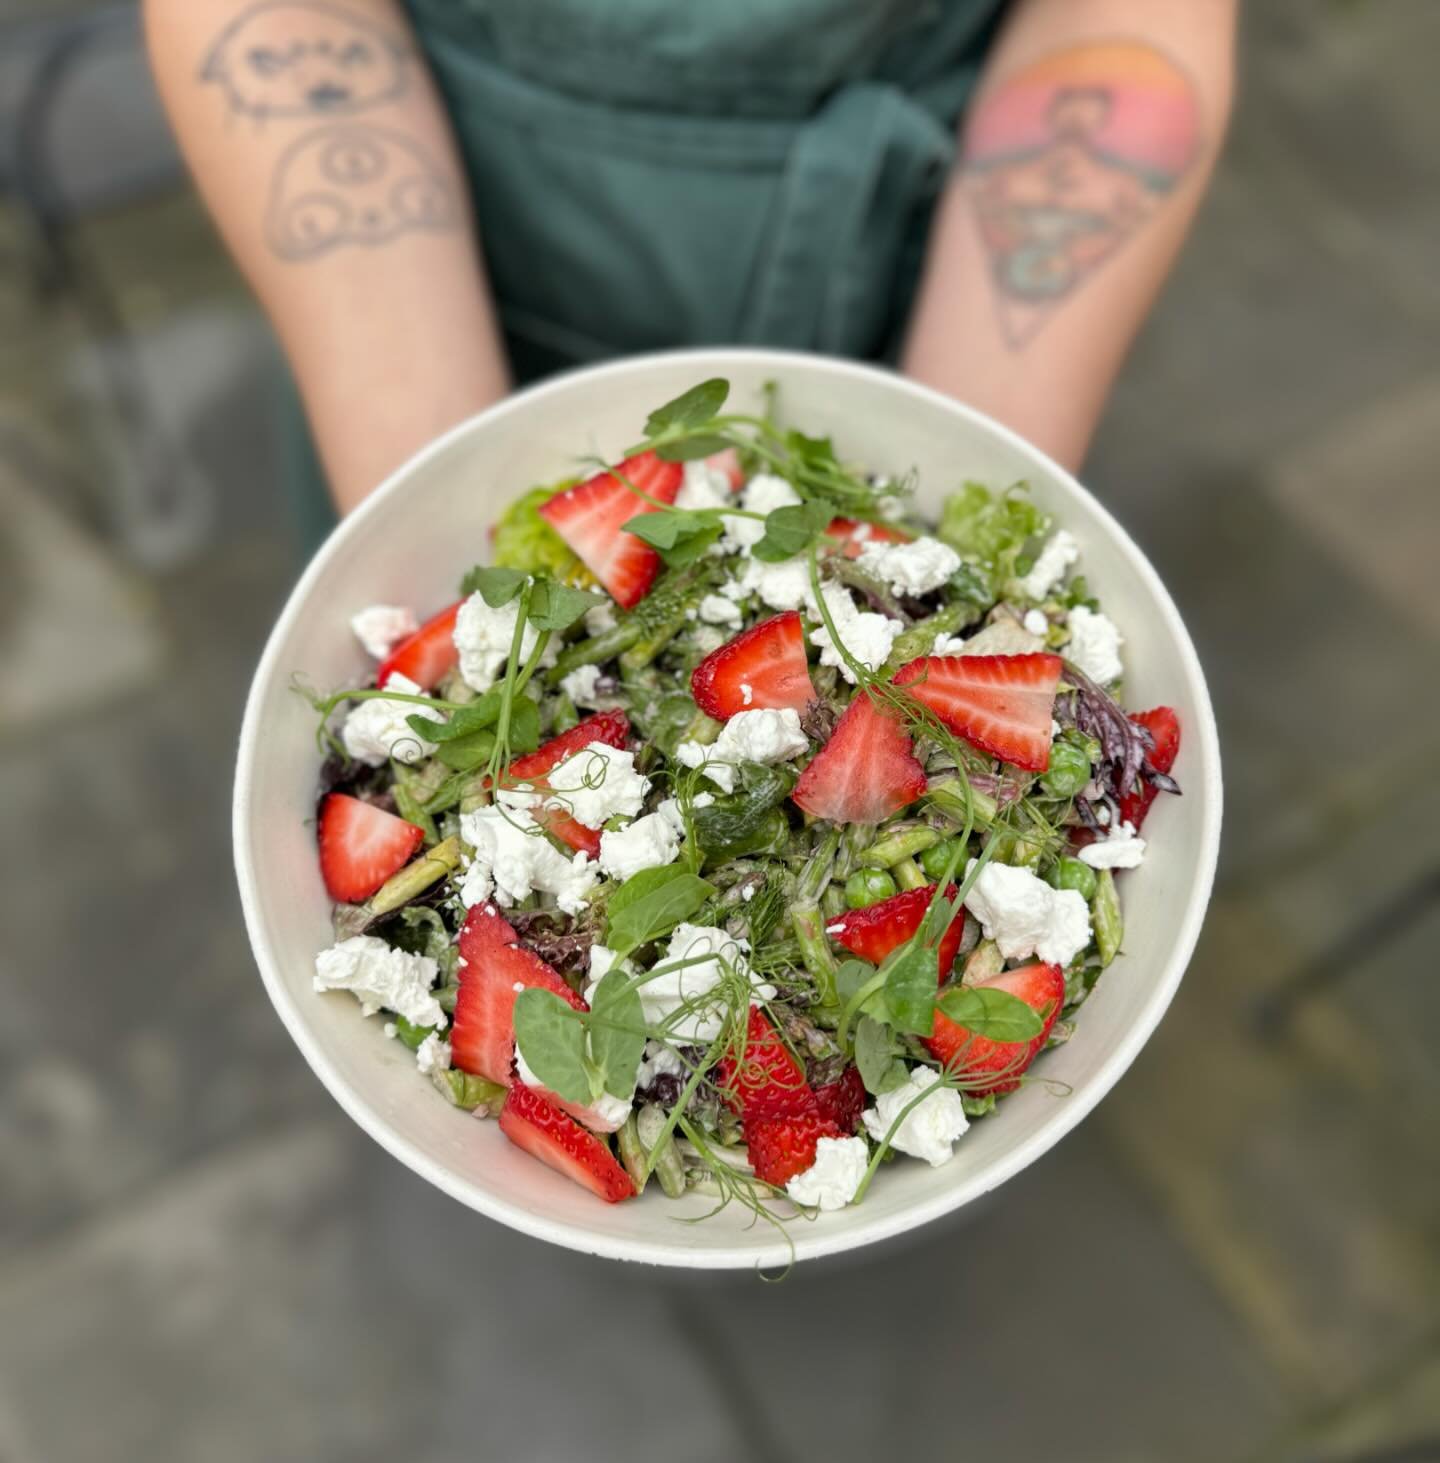 Nothing says spring like peas and strawberries! This beautiful spring salad is on our brunch menu! 

Strawberry and sumac salad with peas, asparagus, goat cheese, and butter croutons.

We hope you all have a wonderful Mother&rsquo;s Day!